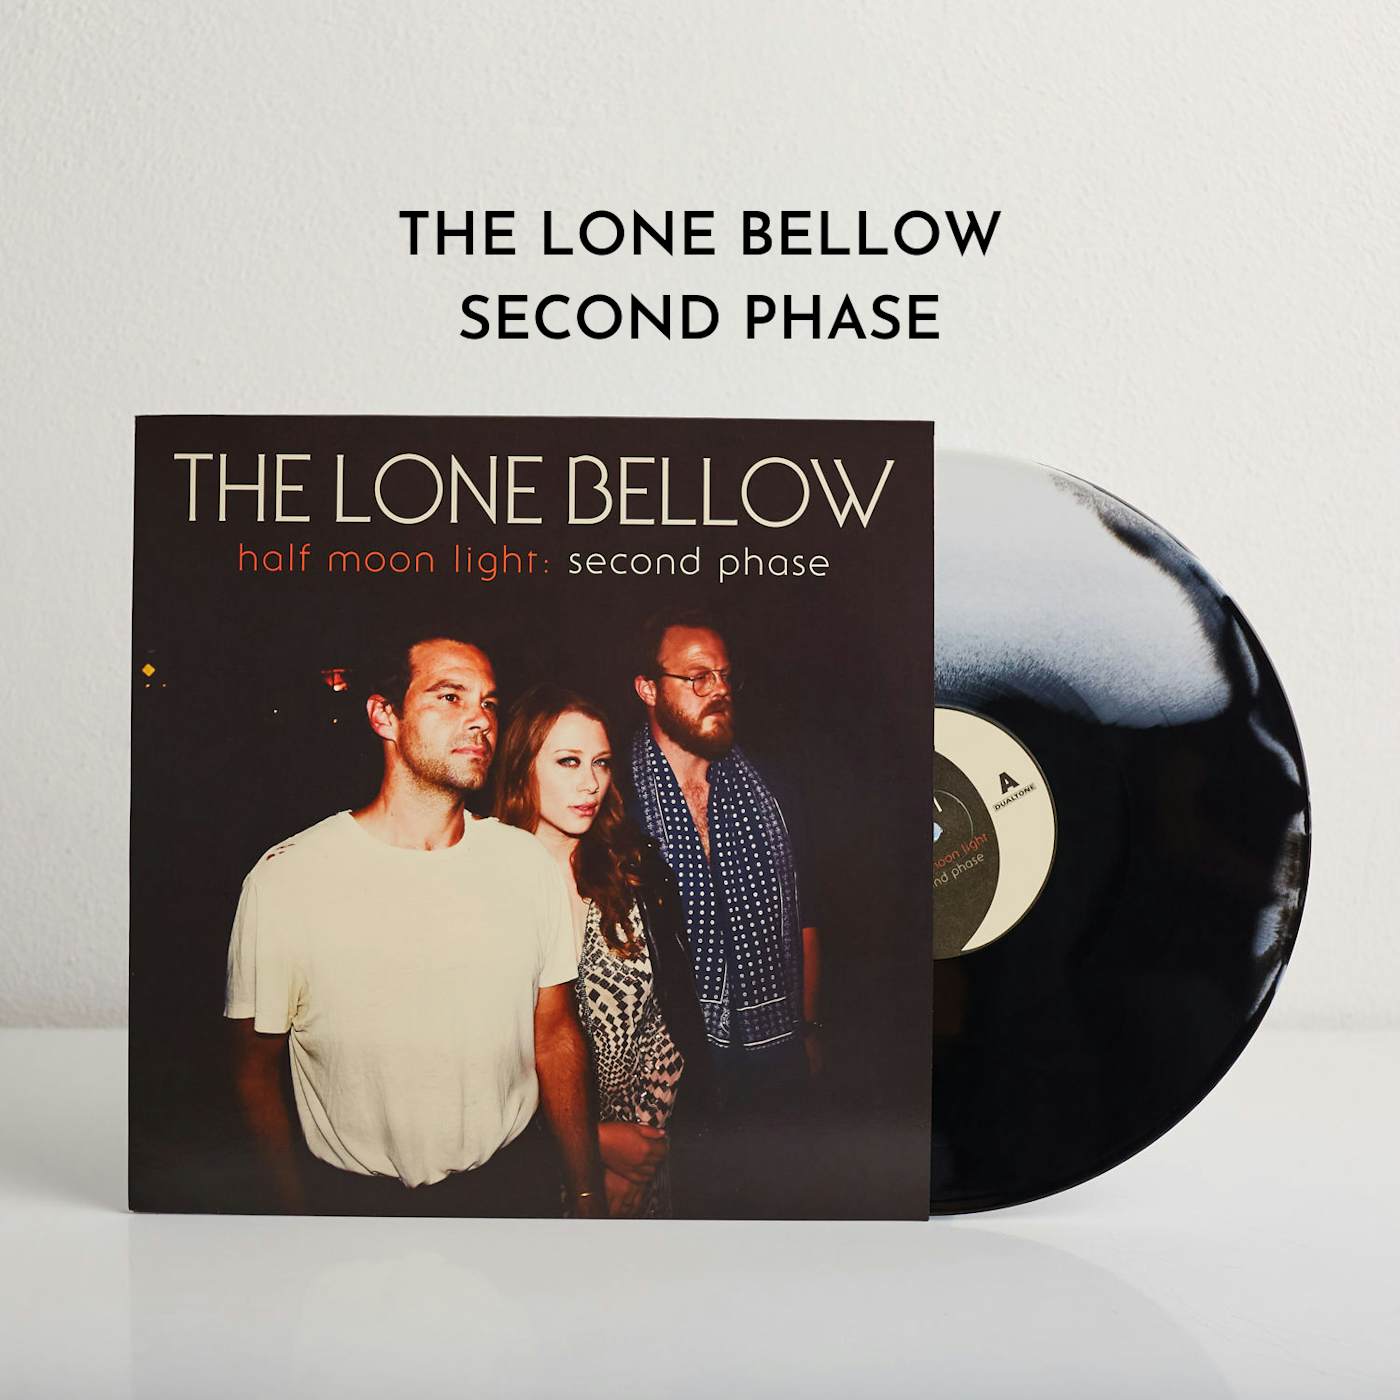 The Lone Bellow Second Phase (Vinyl)